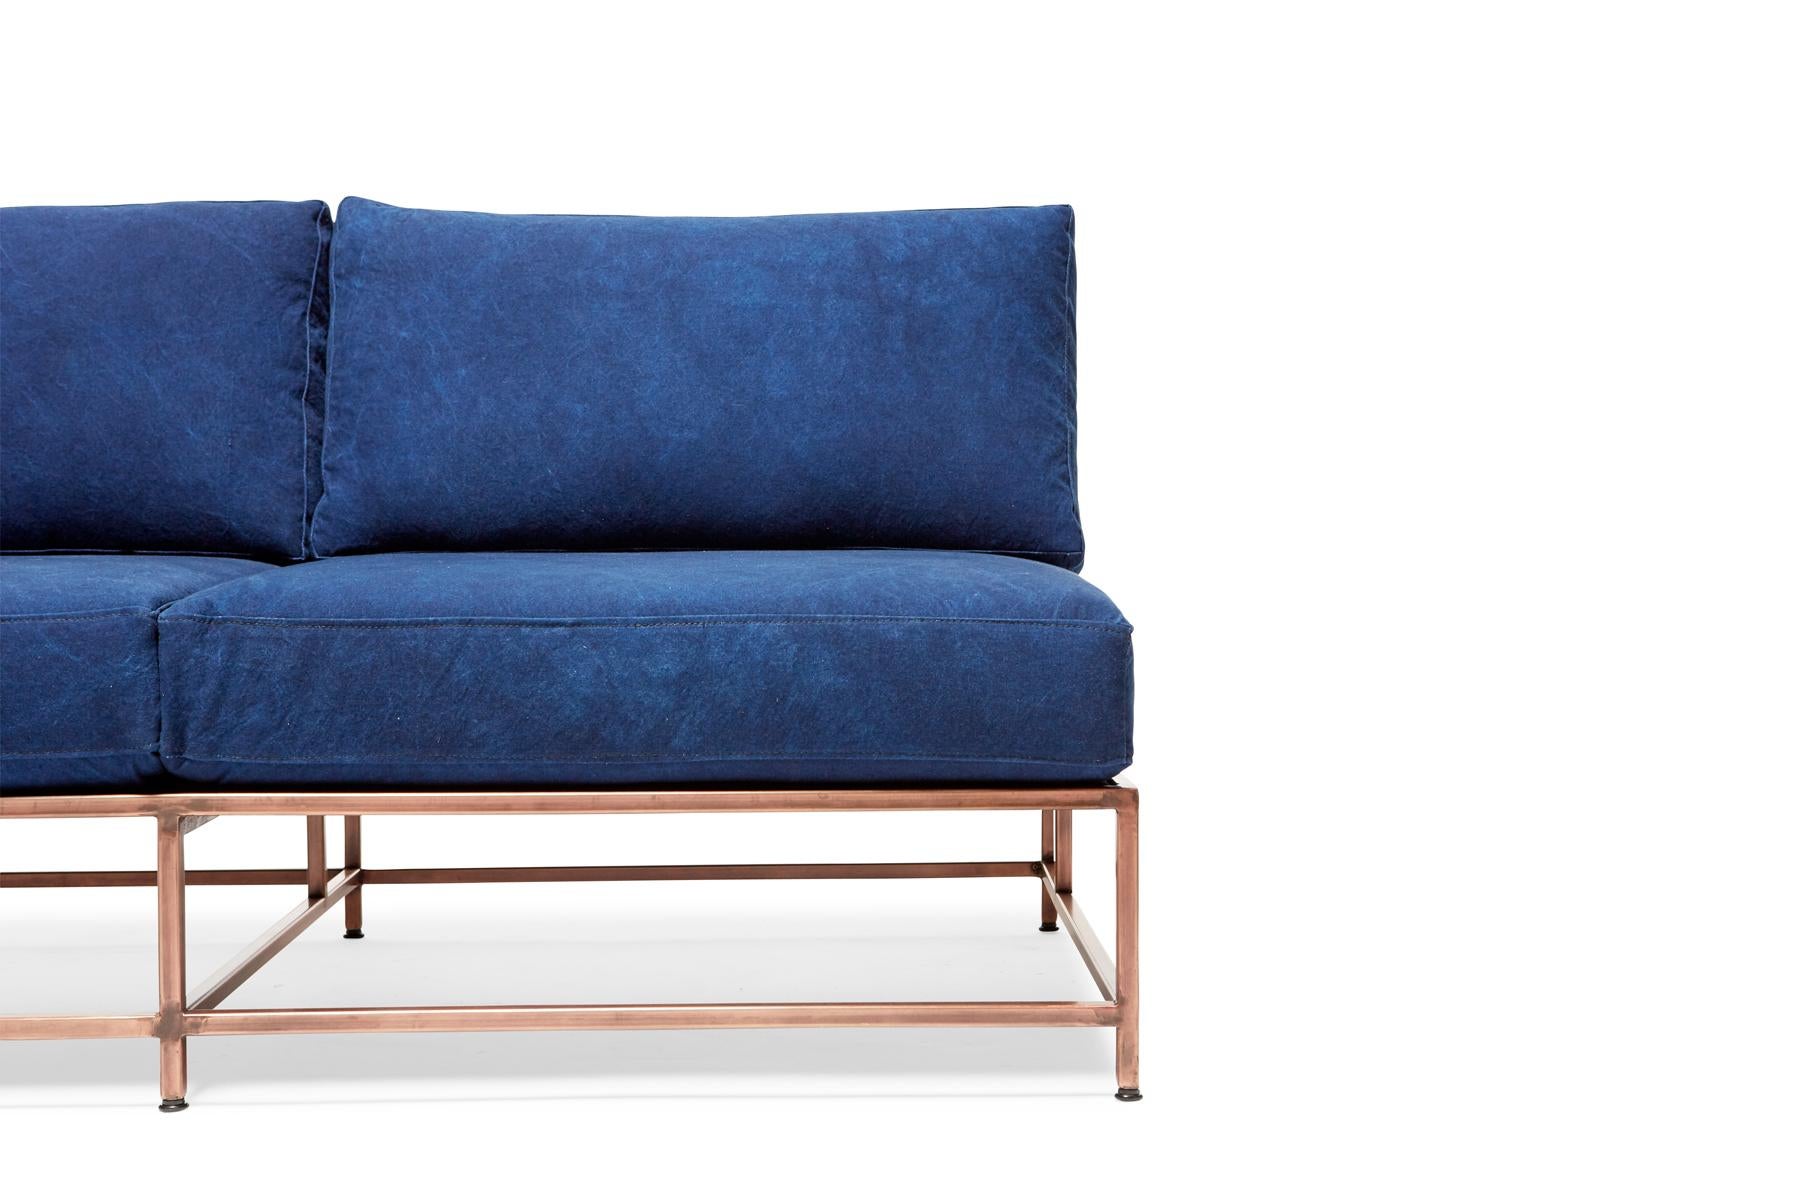 Metalwork Hand-Dyed Indigo Canvas and Antique Copper Loveseat For Sale